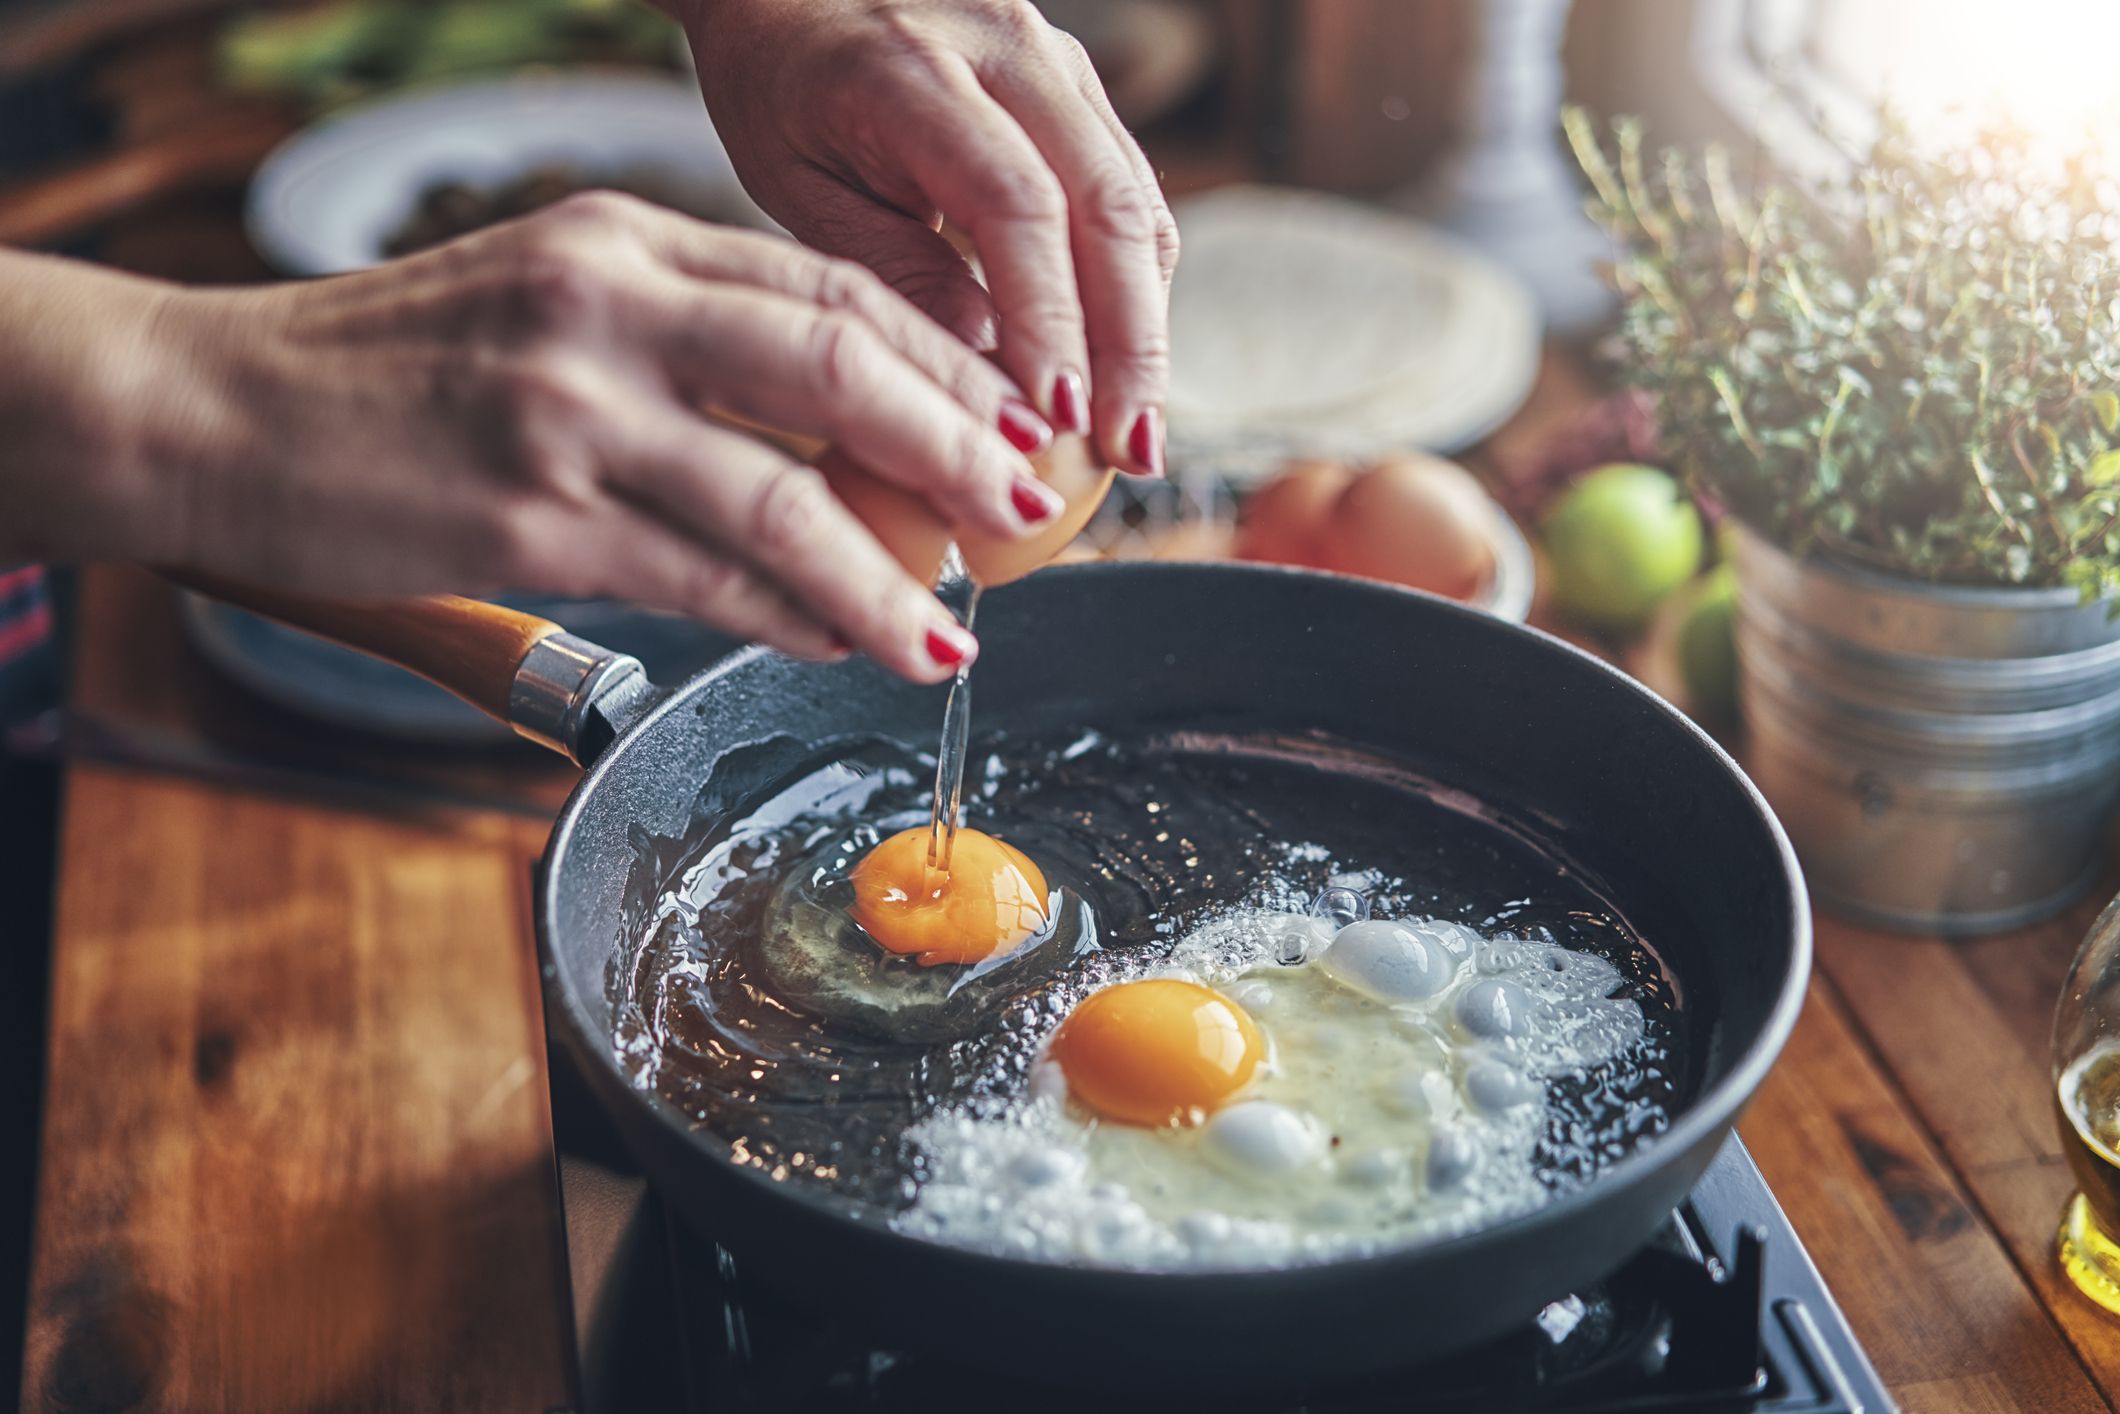 https://hips.hearstapps.com/hmg-prod/images/frying-egg-in-a-cooking-pan-in-domestic-kitchen-royalty-free-image-1129381764-1566925040.jpg